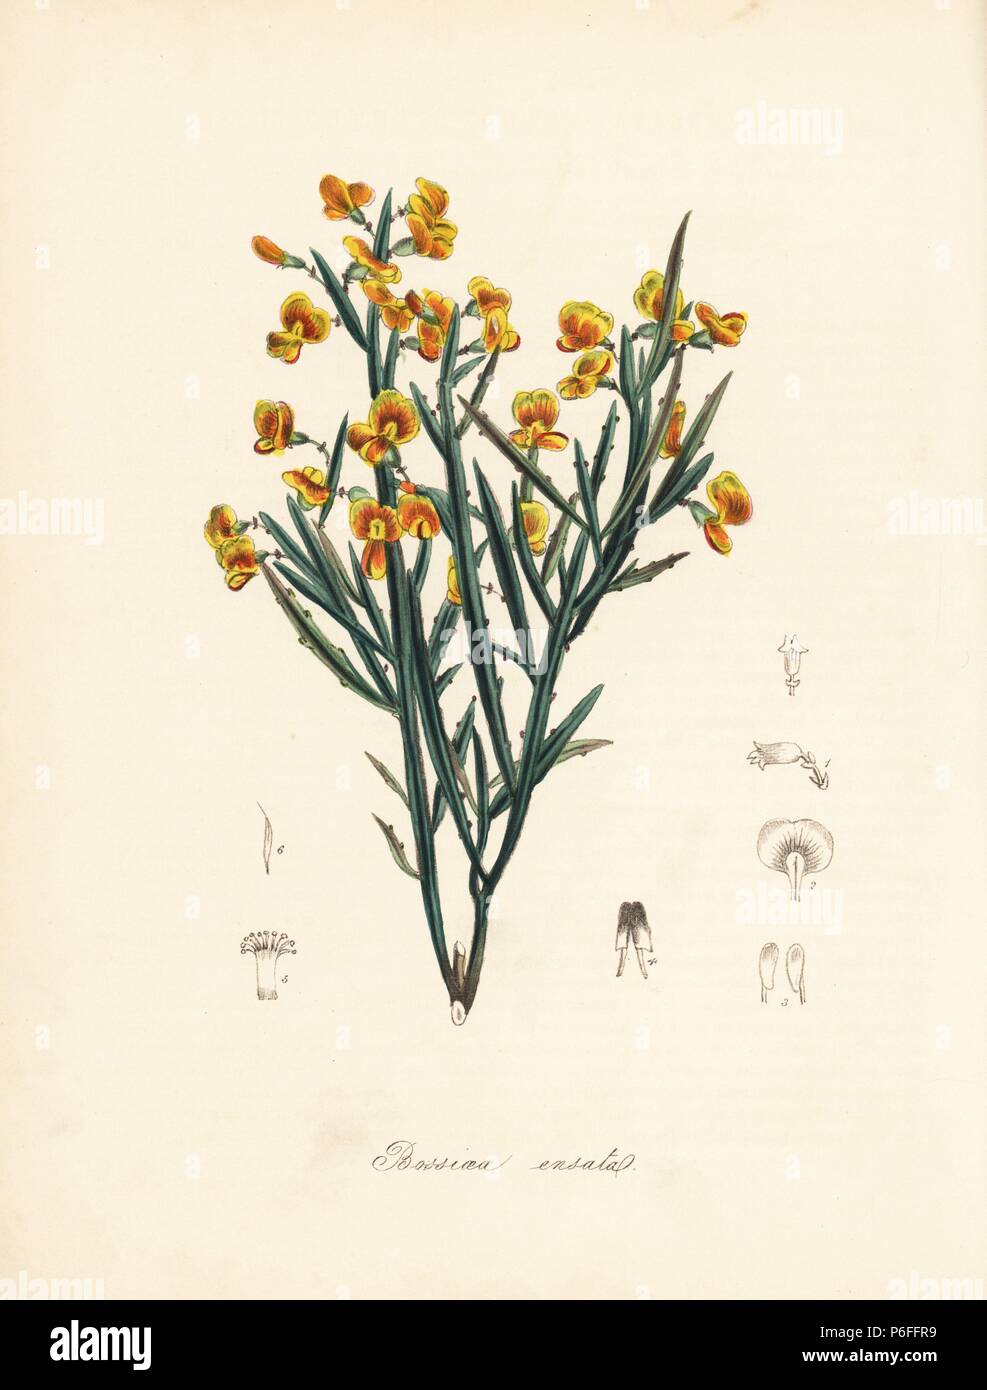 Sword-stemmed bossiaea, Bossiaea ensata. After an illustration by E.D. Smith in 'Flora Australasica.' Handcoloured zincograph by C. Chabot drawn by Miss M. A. Burnett from her 'Plantae Utiliores: or Illustrations of Useful Plants,' Whittaker, London, 1842. Miss Burnett drew the botanical illustrations, but the text was chiefly by her late brother, British botanist Gilbert Thomas Burnett (1800-1835). Stock Photo